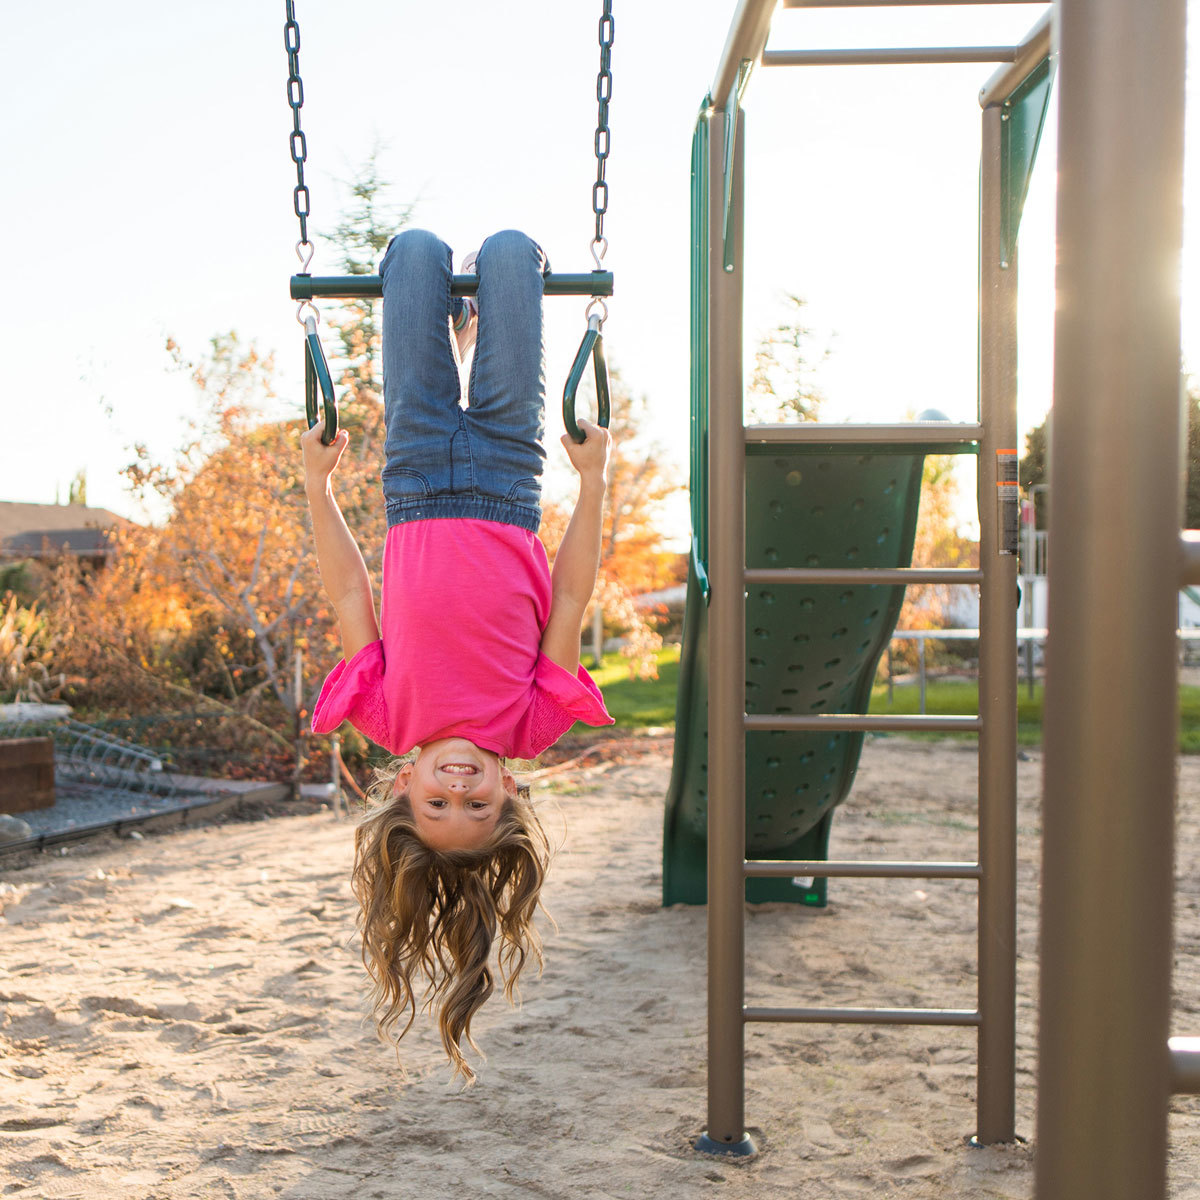 Lifetime Monkey bars with child playing